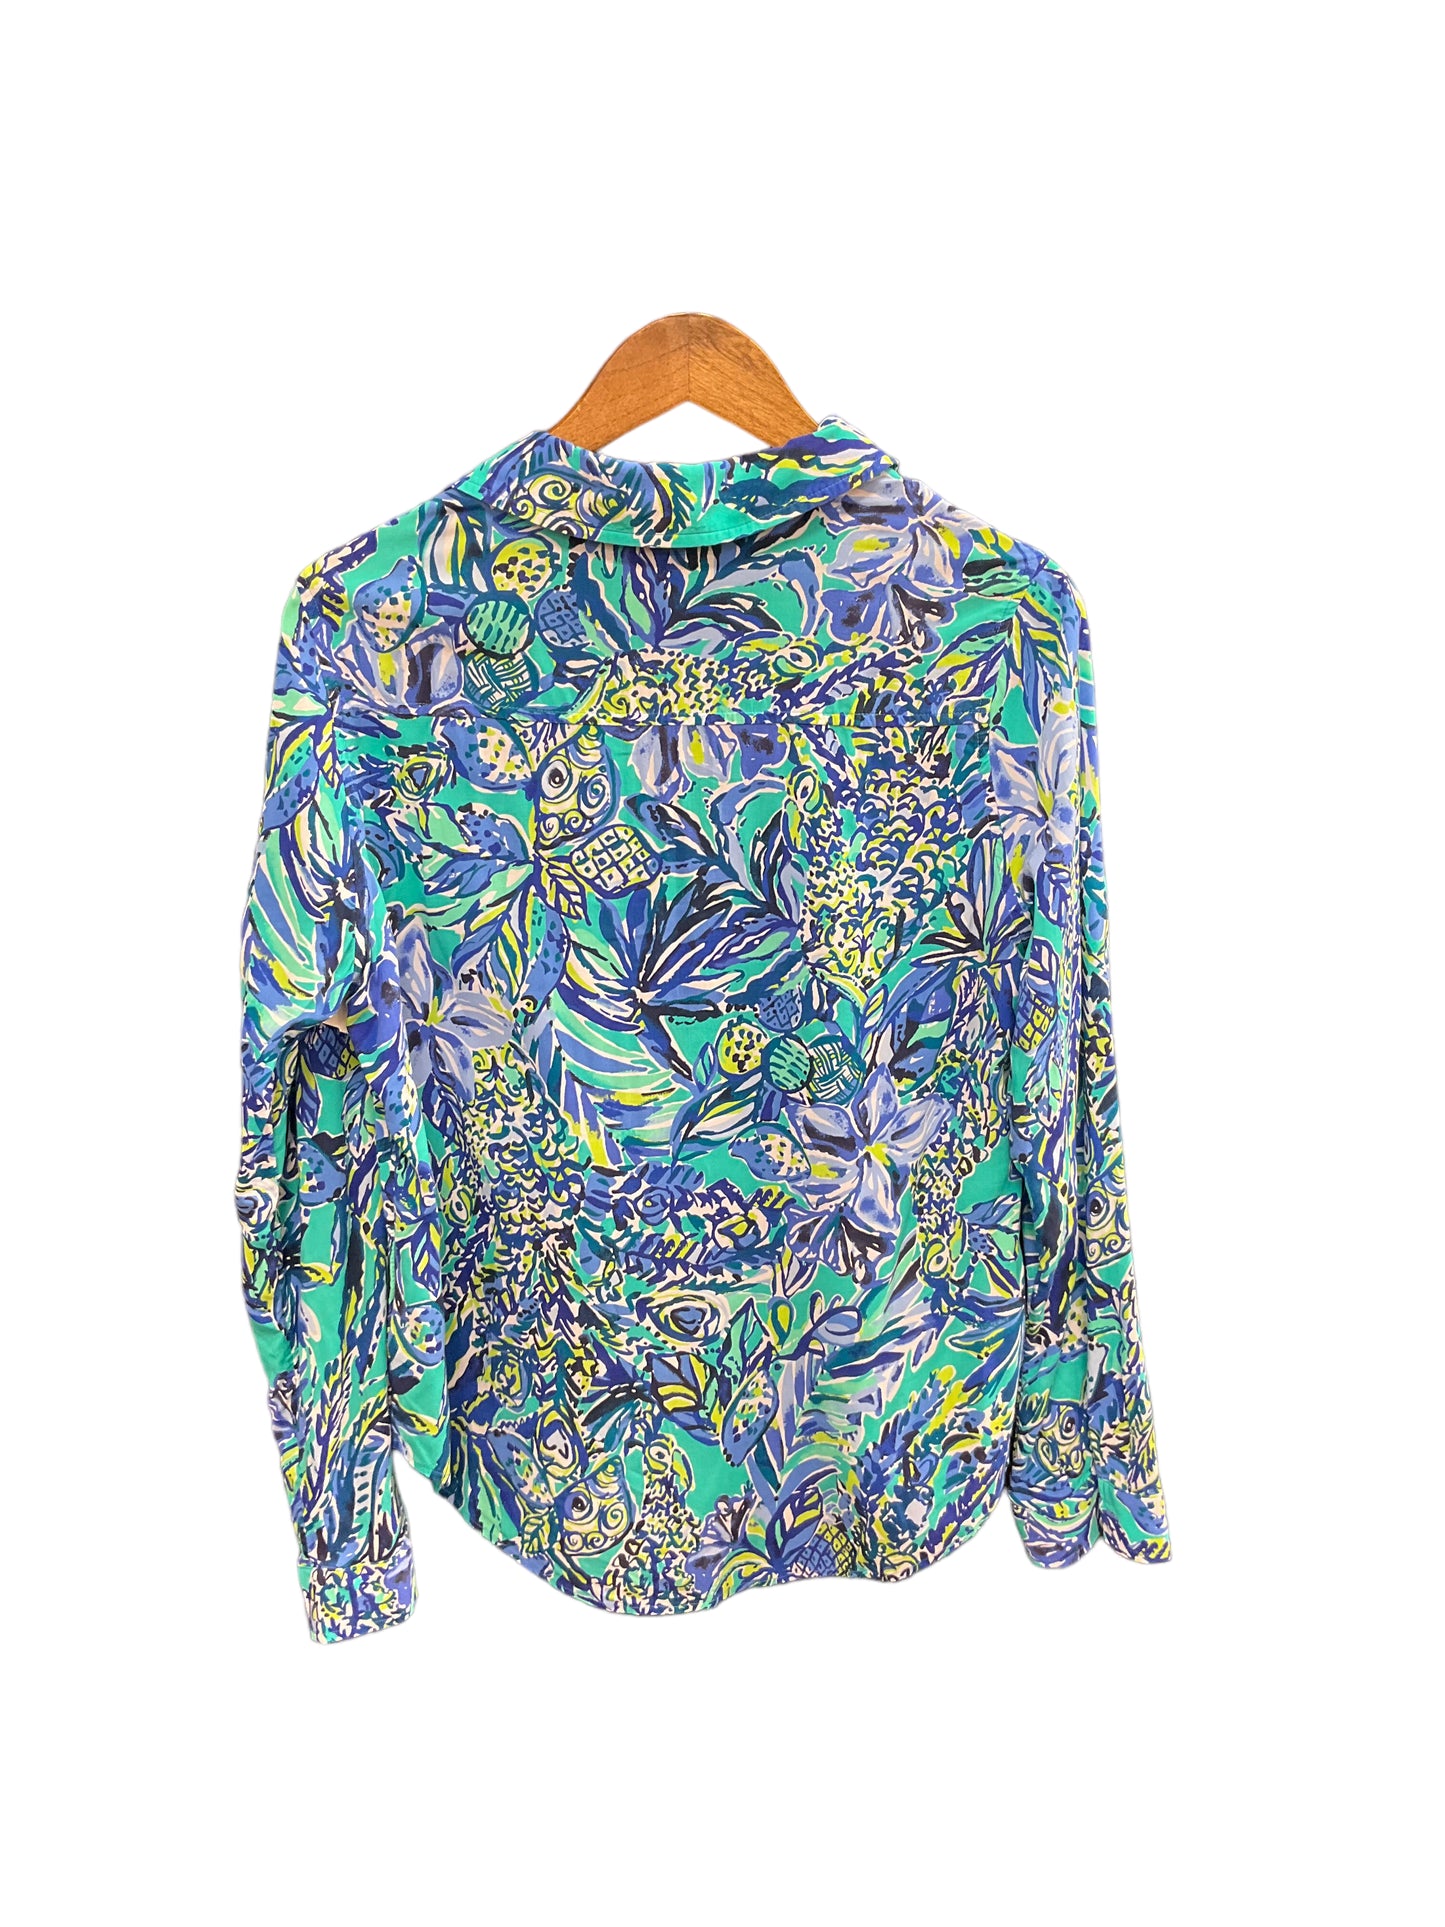 Blouse Long Sleeve By Lilly Pulitzer  Size: M